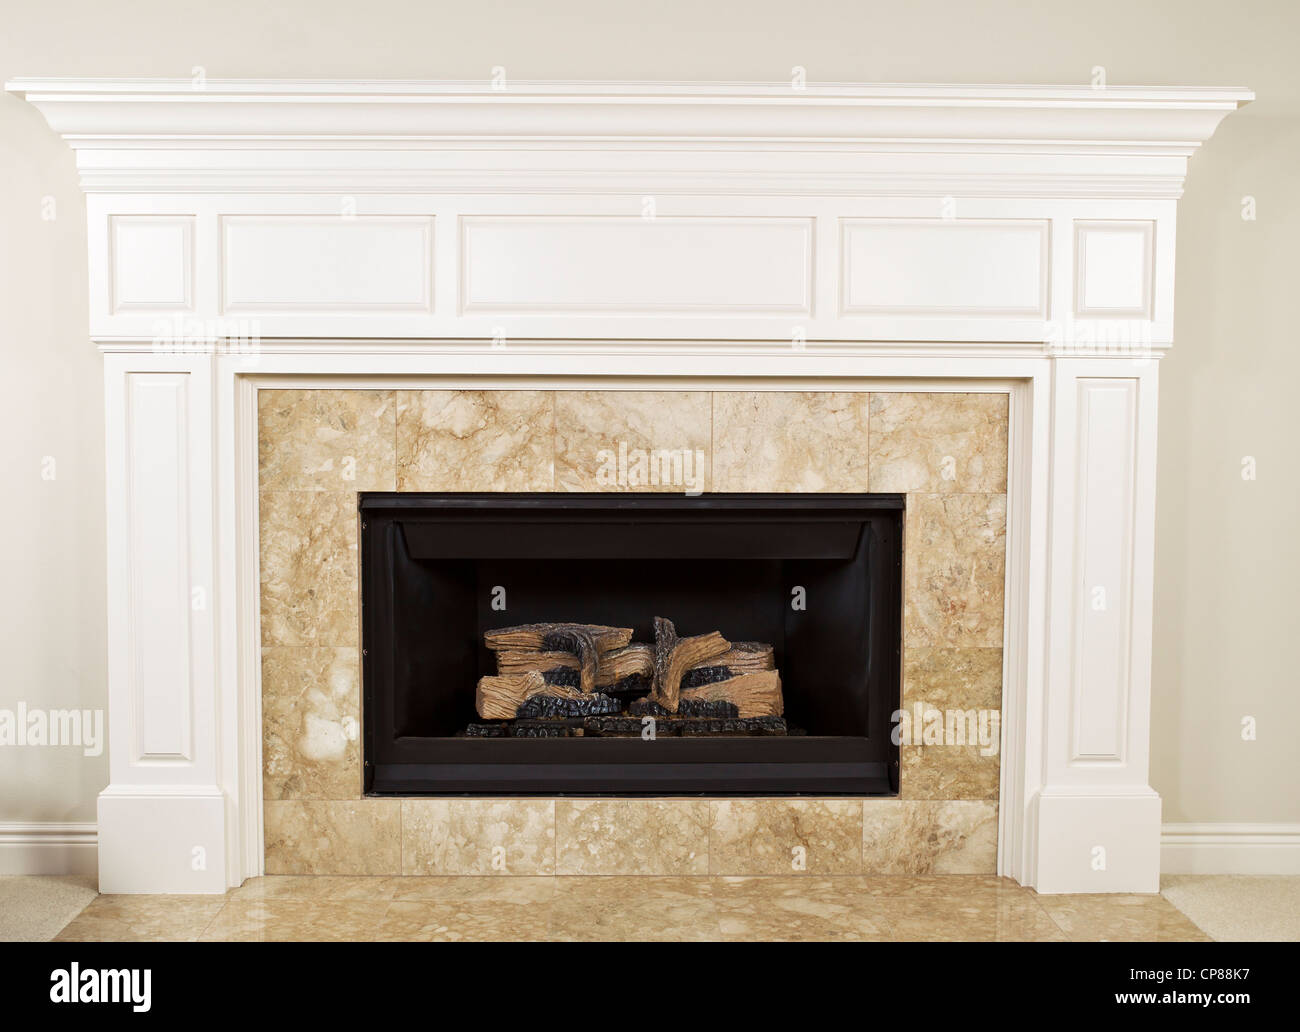 Fireplace Mantel High Resolution Stock Photography and Images - Alamy